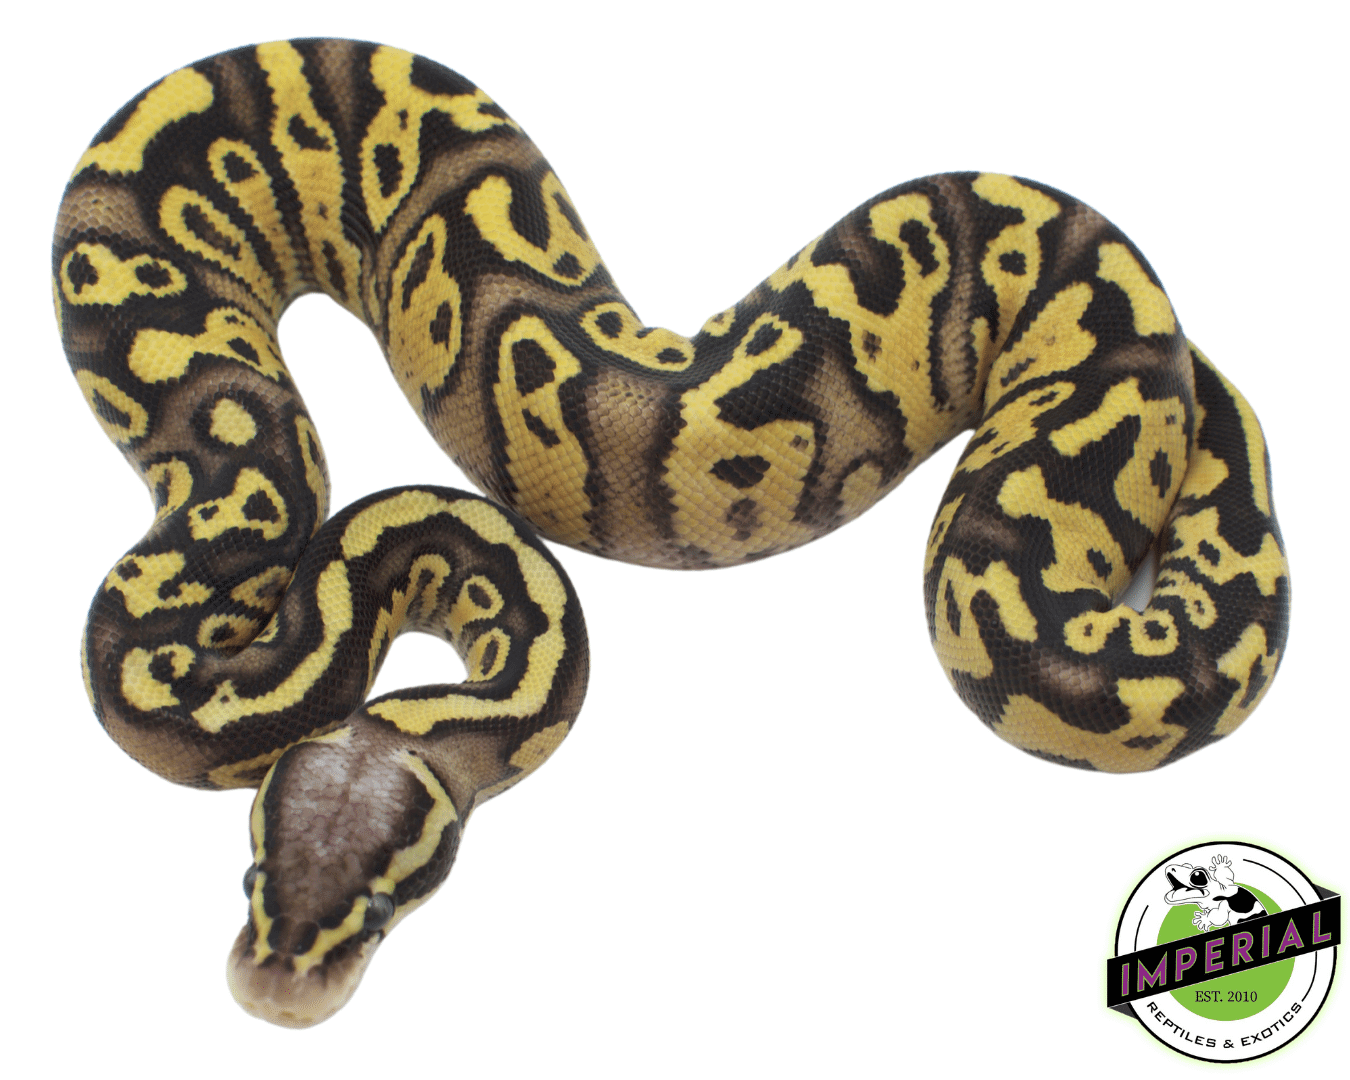 firefly ball python for sale, buy reptiles online